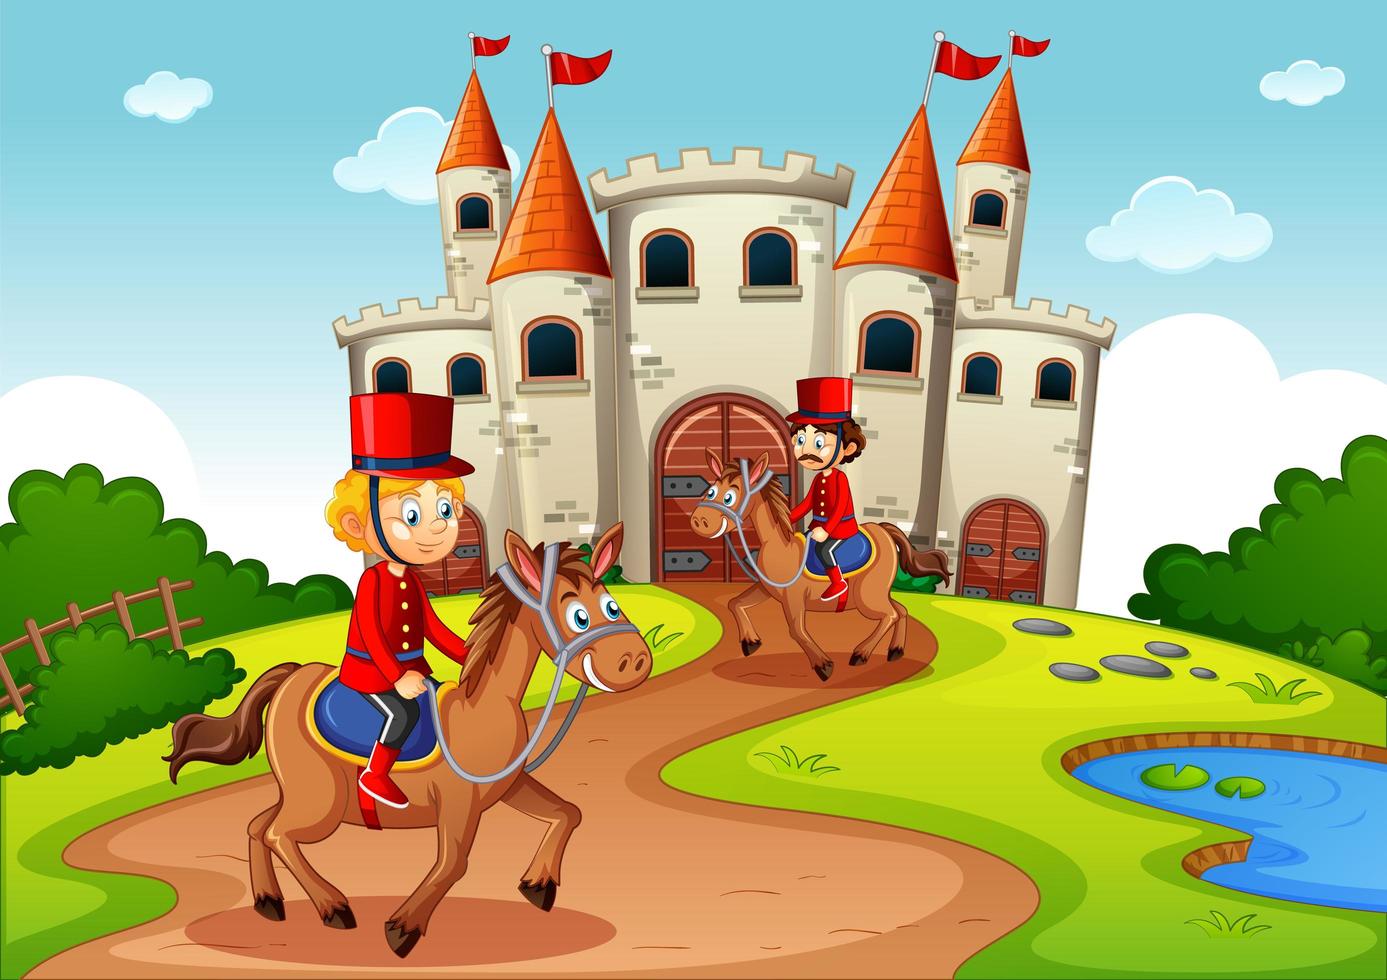 Fairytale scene with castle and soldier royal guard scene vector